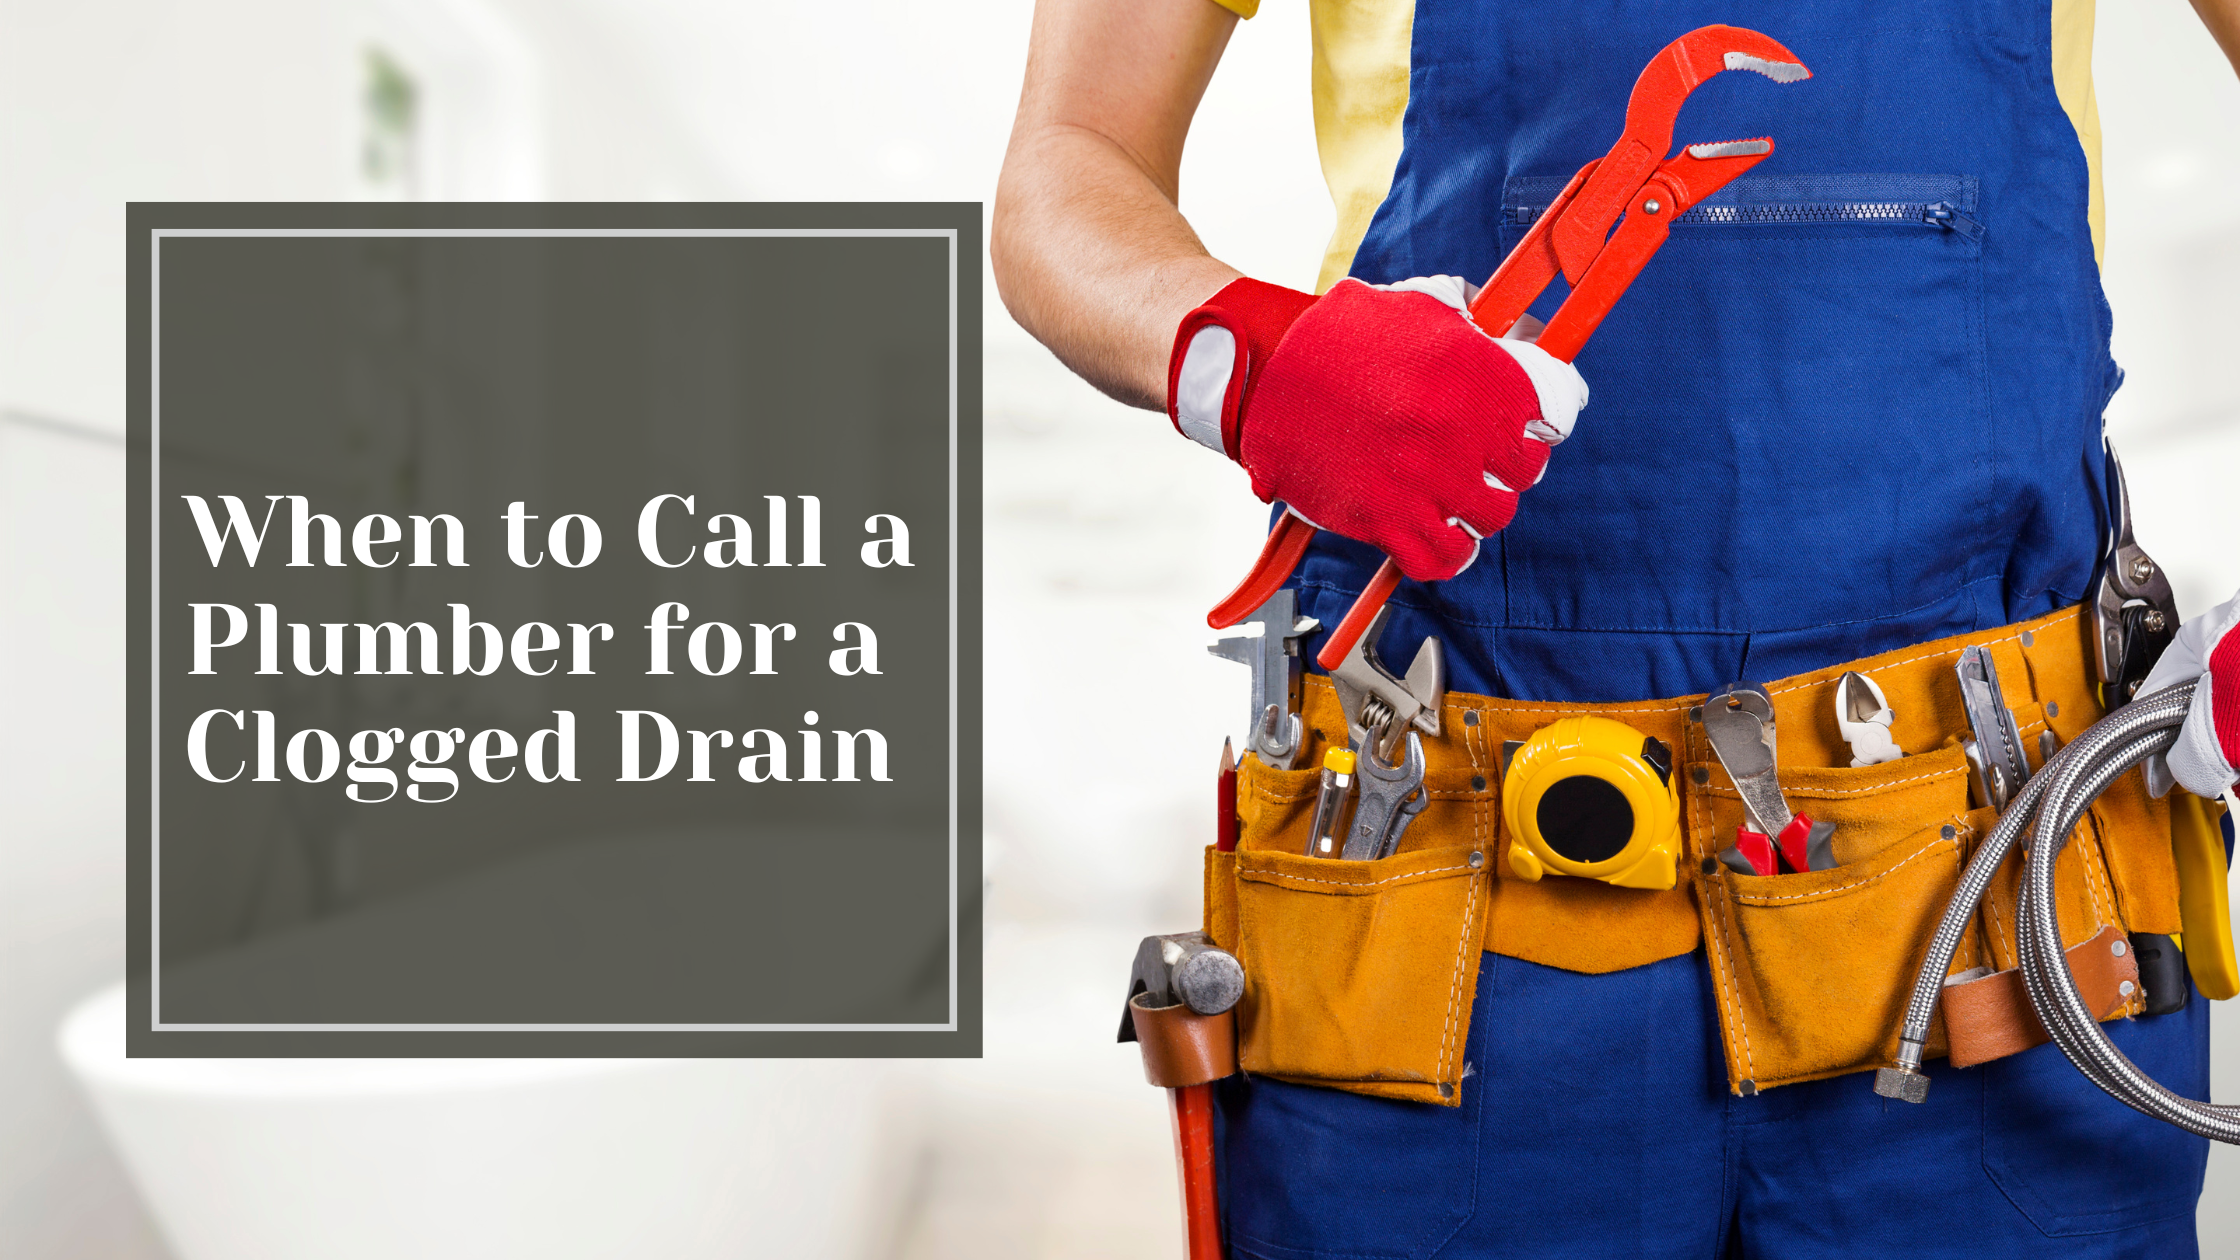 Call a Plumber: When to Call a Plumber for a Clogged Drain